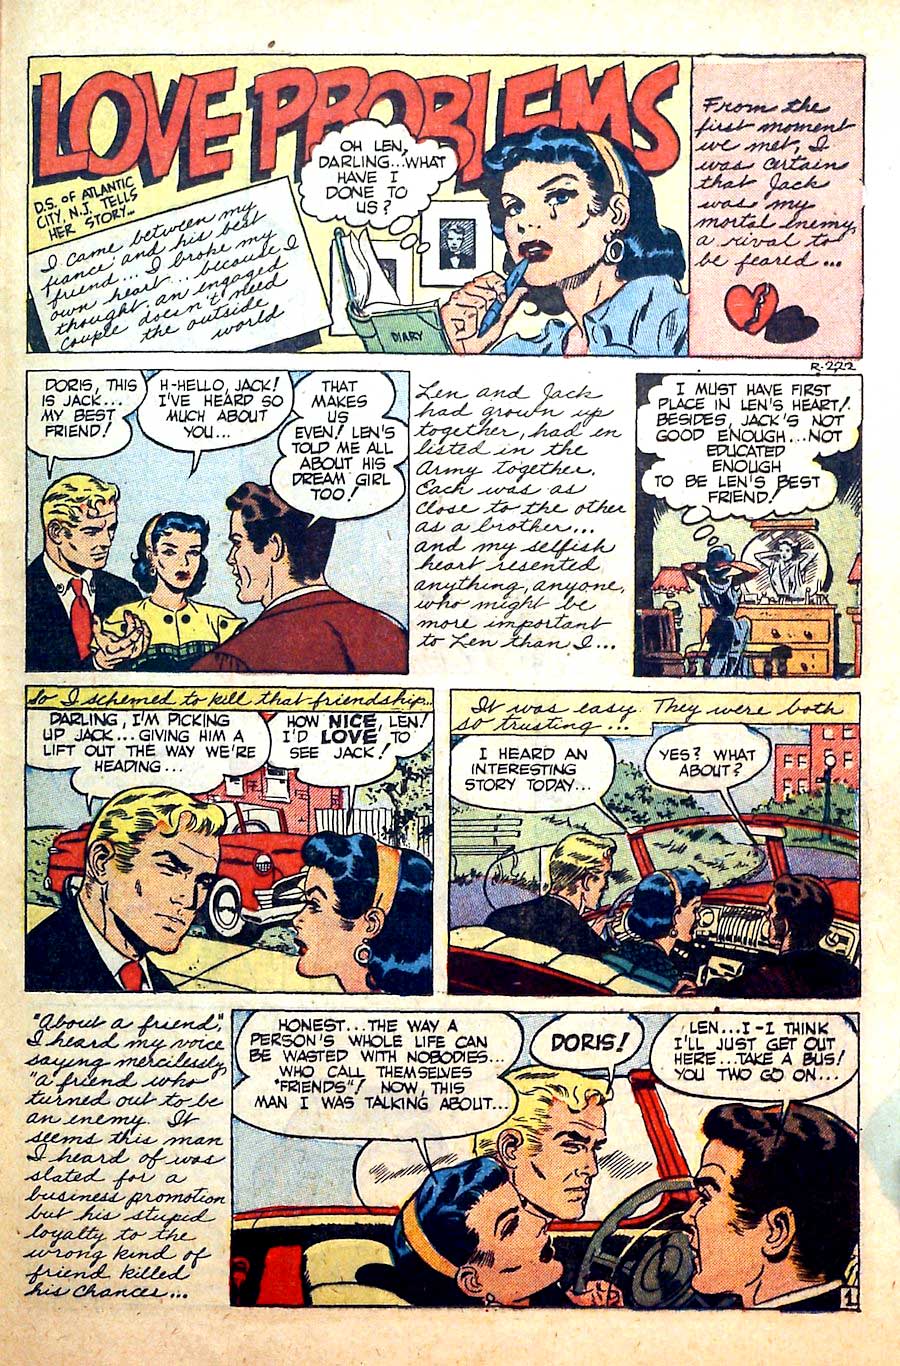 Thrilling Romances #12 golden age 1950s standard comic book page art by Wally Wood